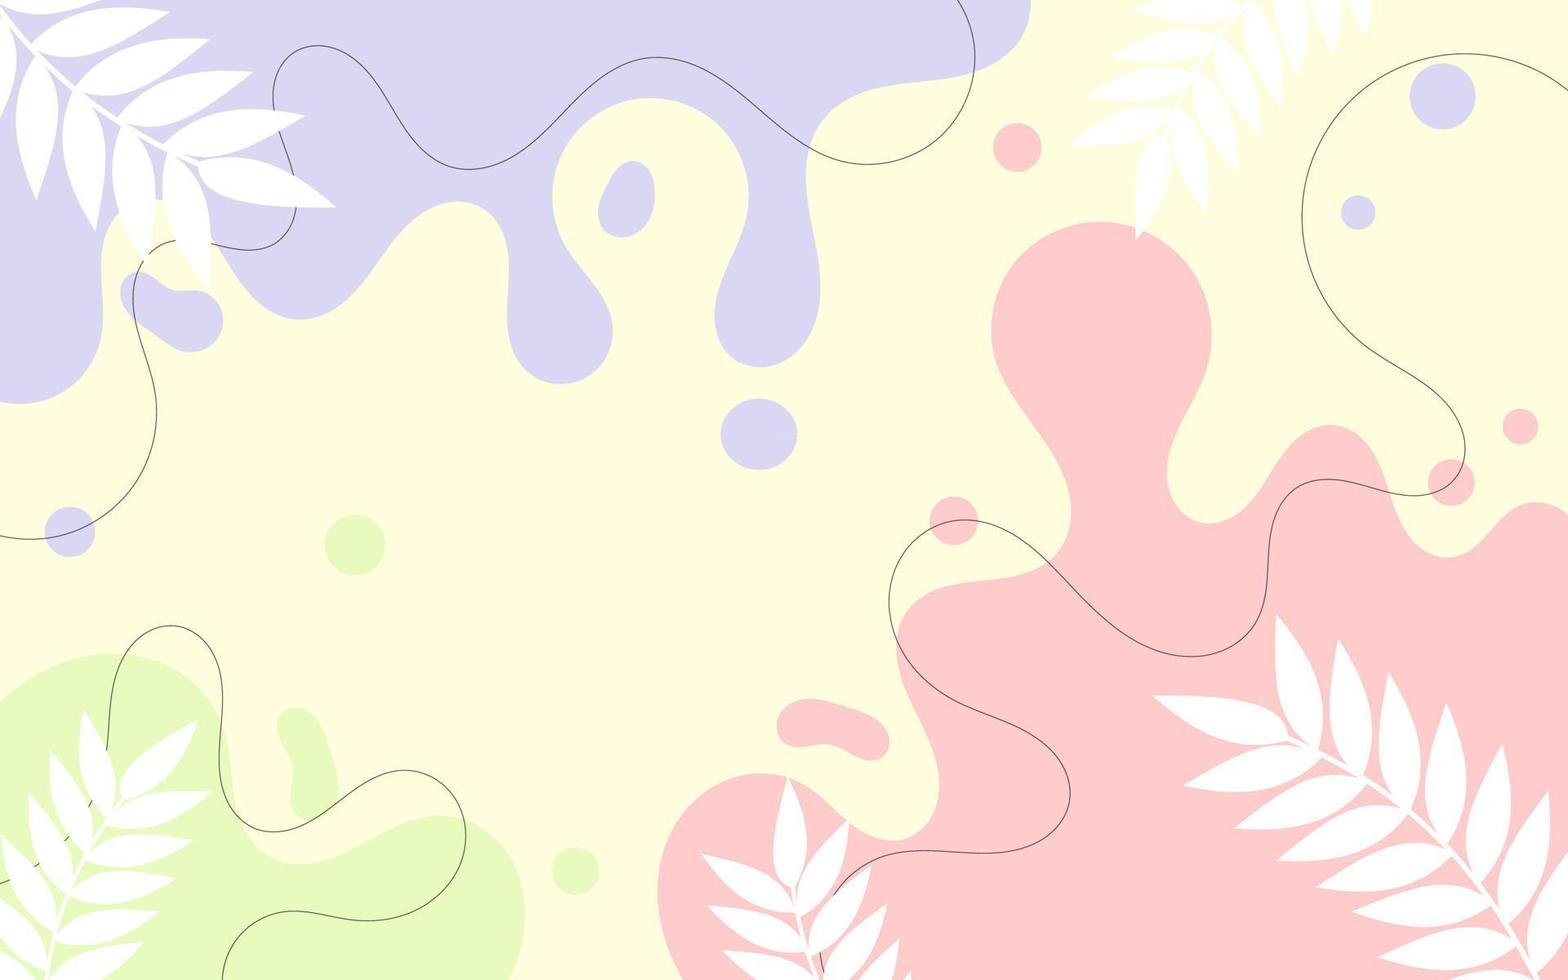 Hand drawn background of leaves in pastel colors background of leaves in pastel colors vector